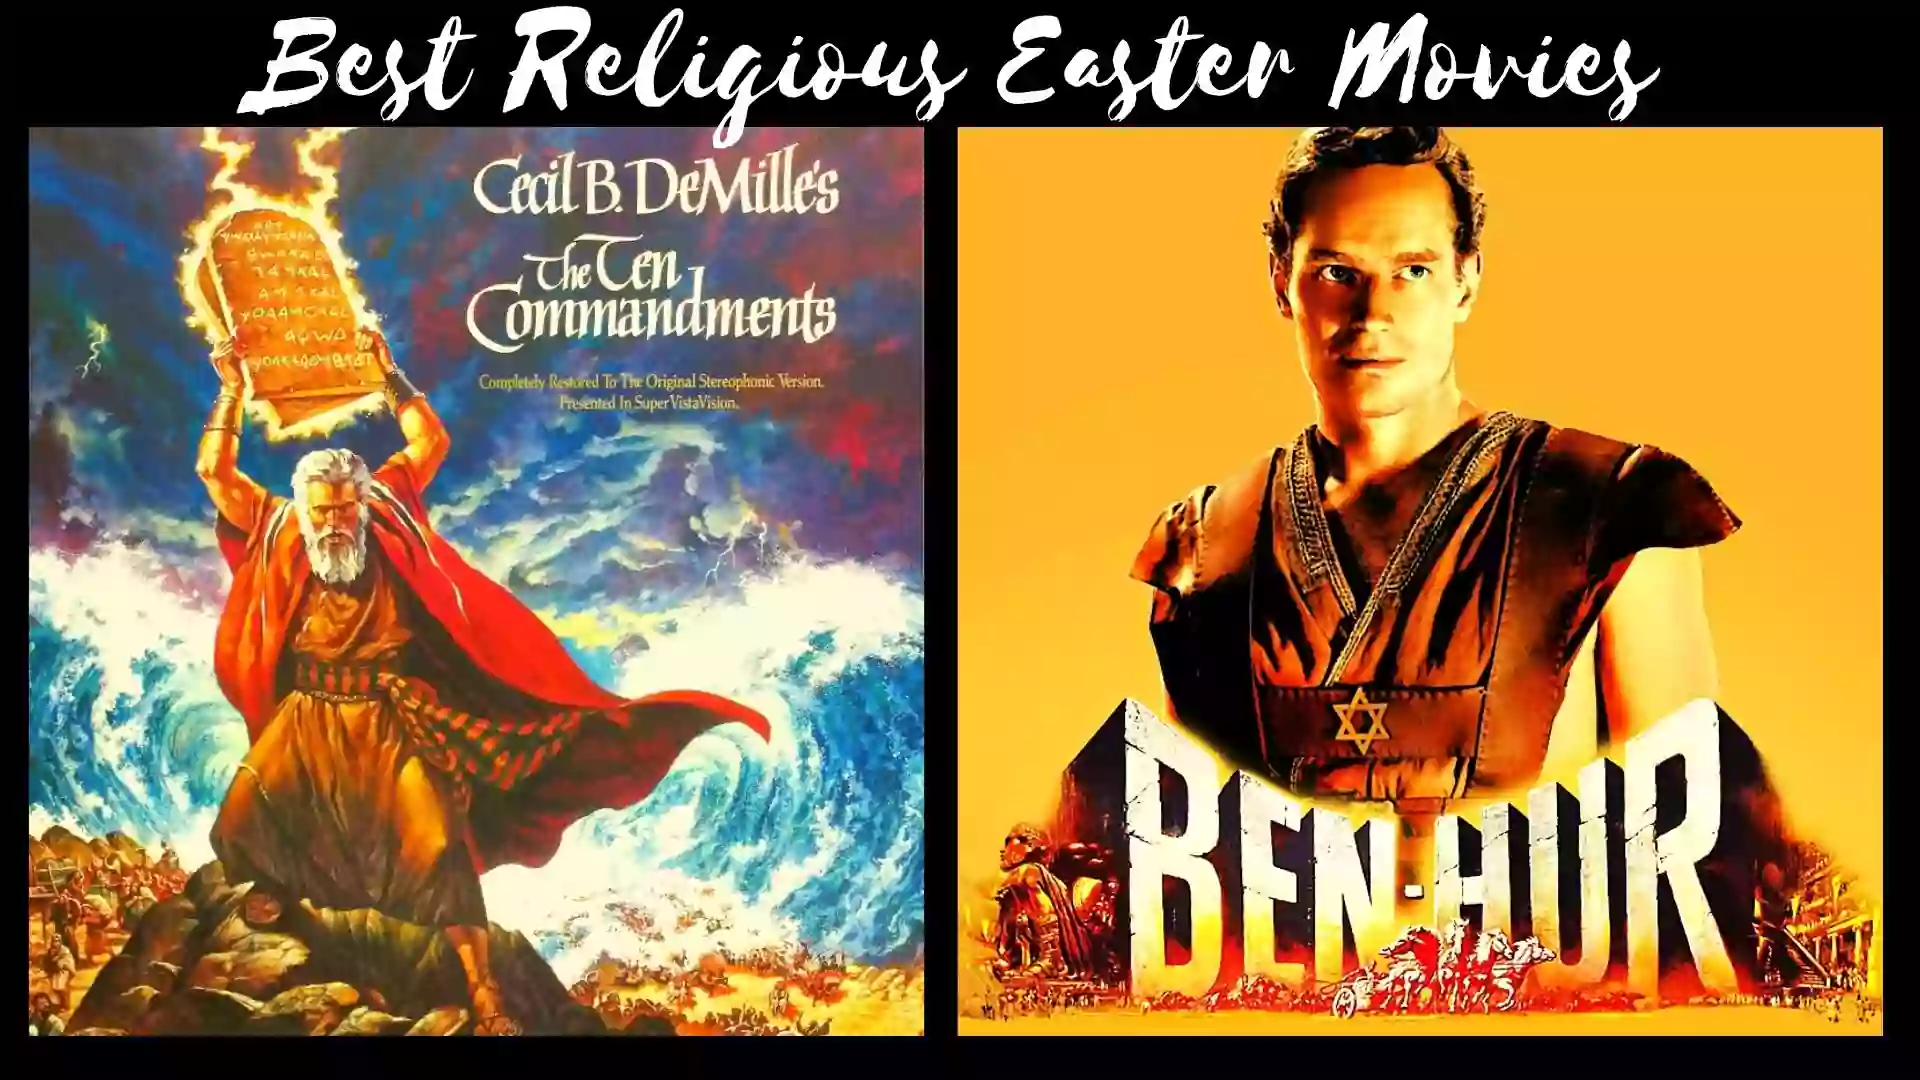 Best Religious Easter Movies